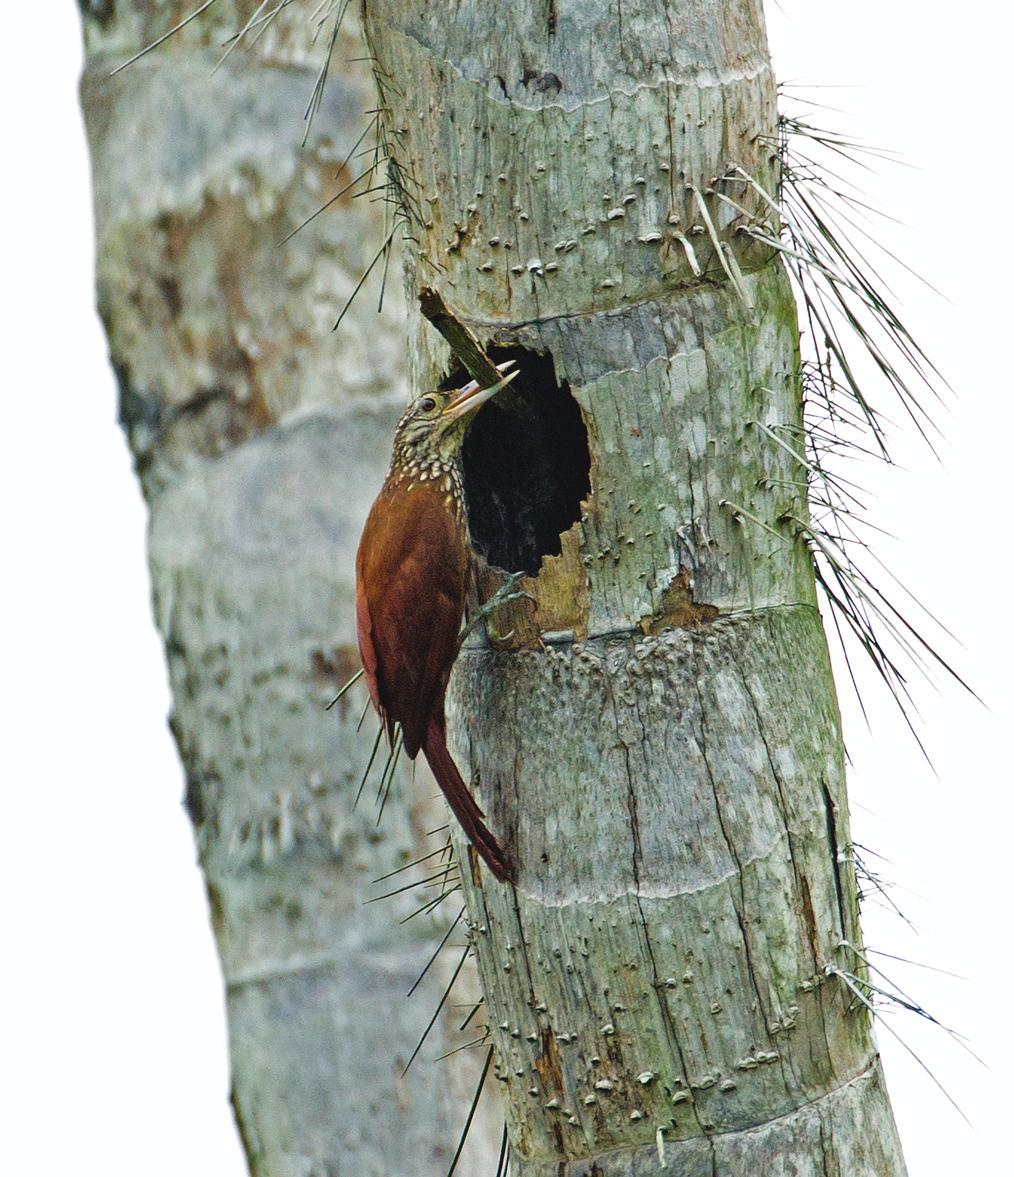 On 11 August, a woodcreeper was seen at the entrance of the nest hole with a bit of dry snake skin, probably the one brought to the nest by the flycatchers, which it took back inside to line the nest